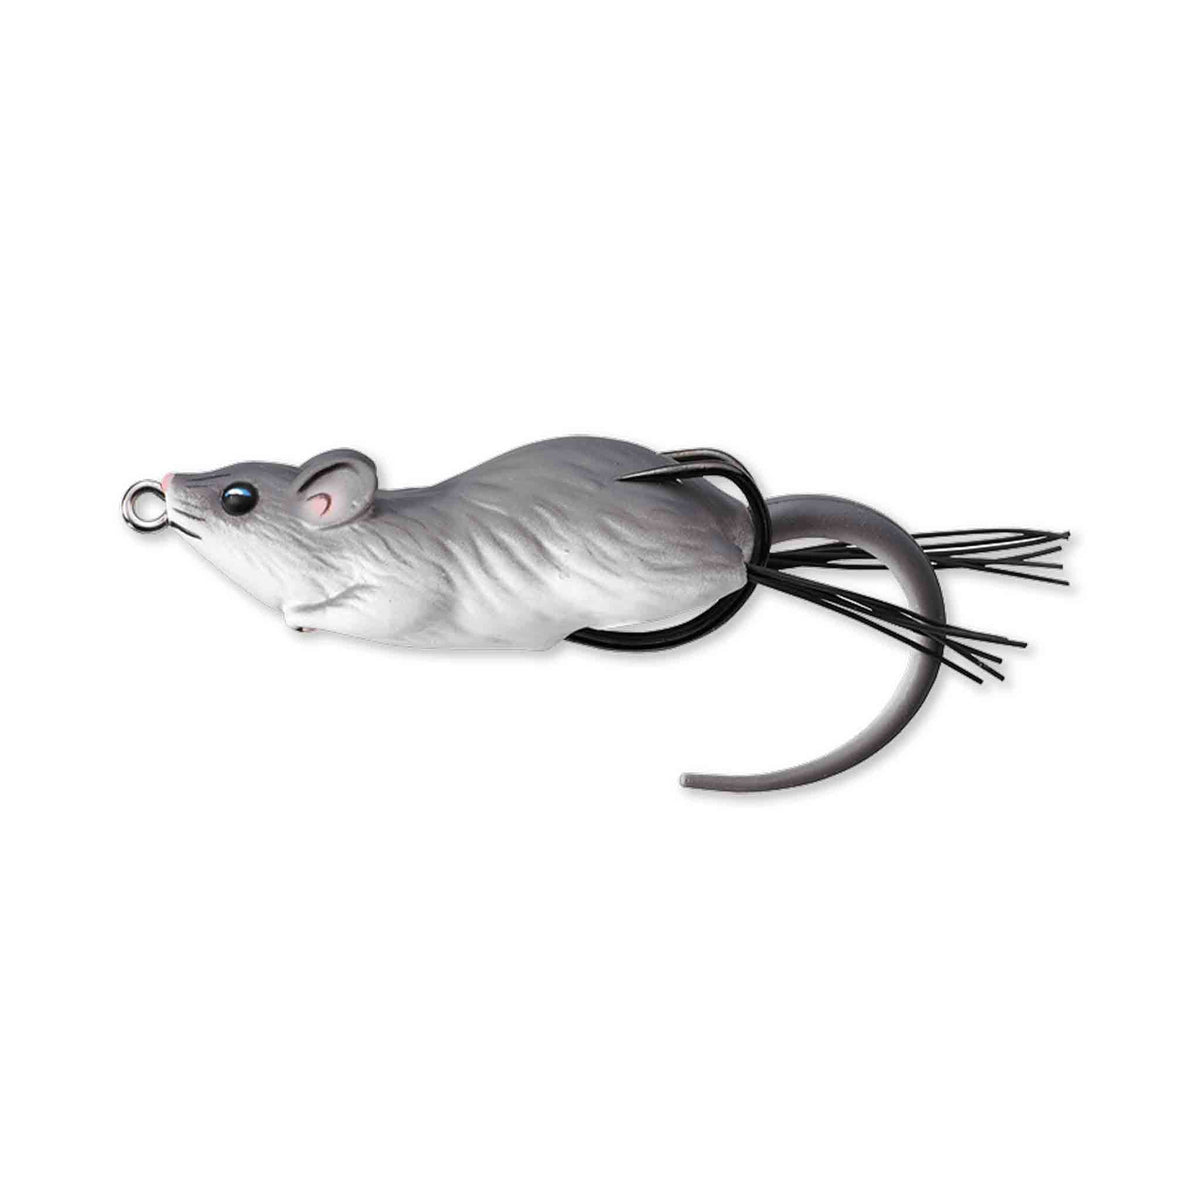 Live Target Hollow Body Mouse 3 1/2 Grey / White Topwater